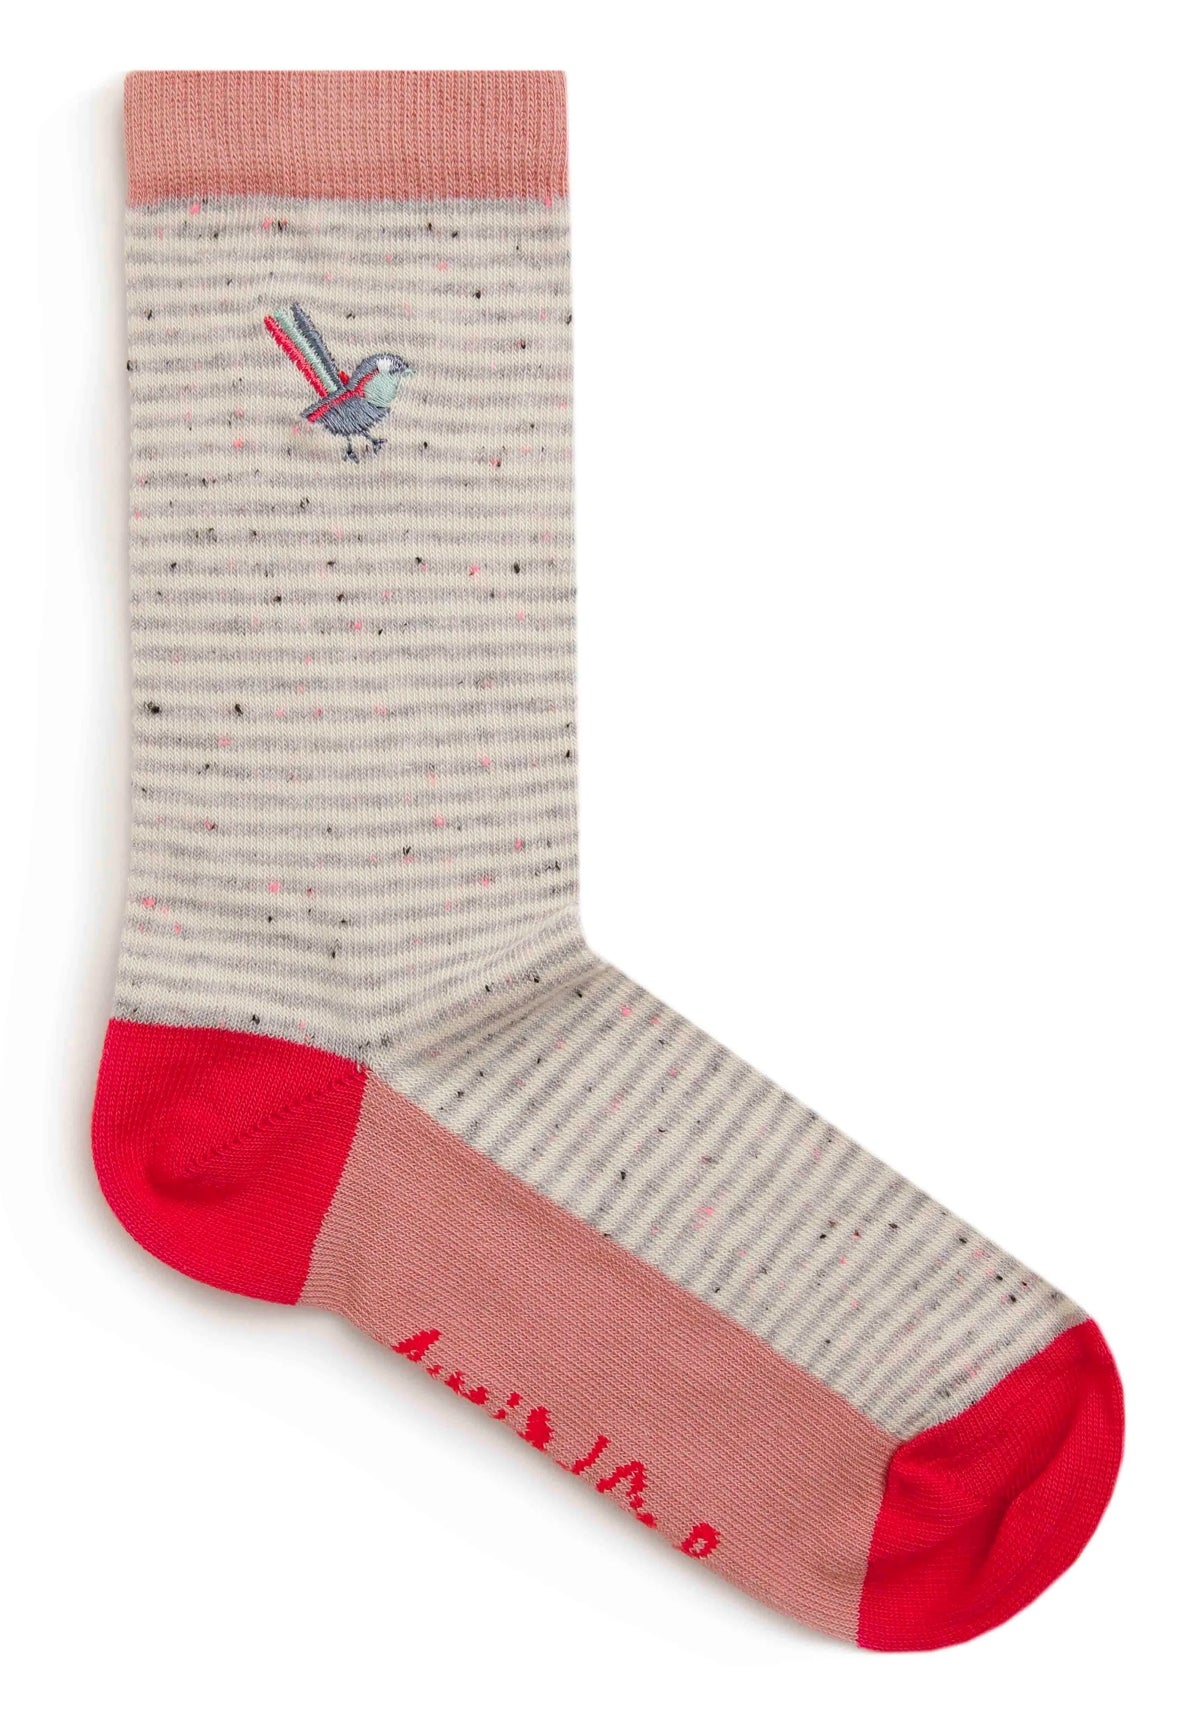 Women's Weird Fish Parade socks in a grey stripe pattern with embroidered bird.